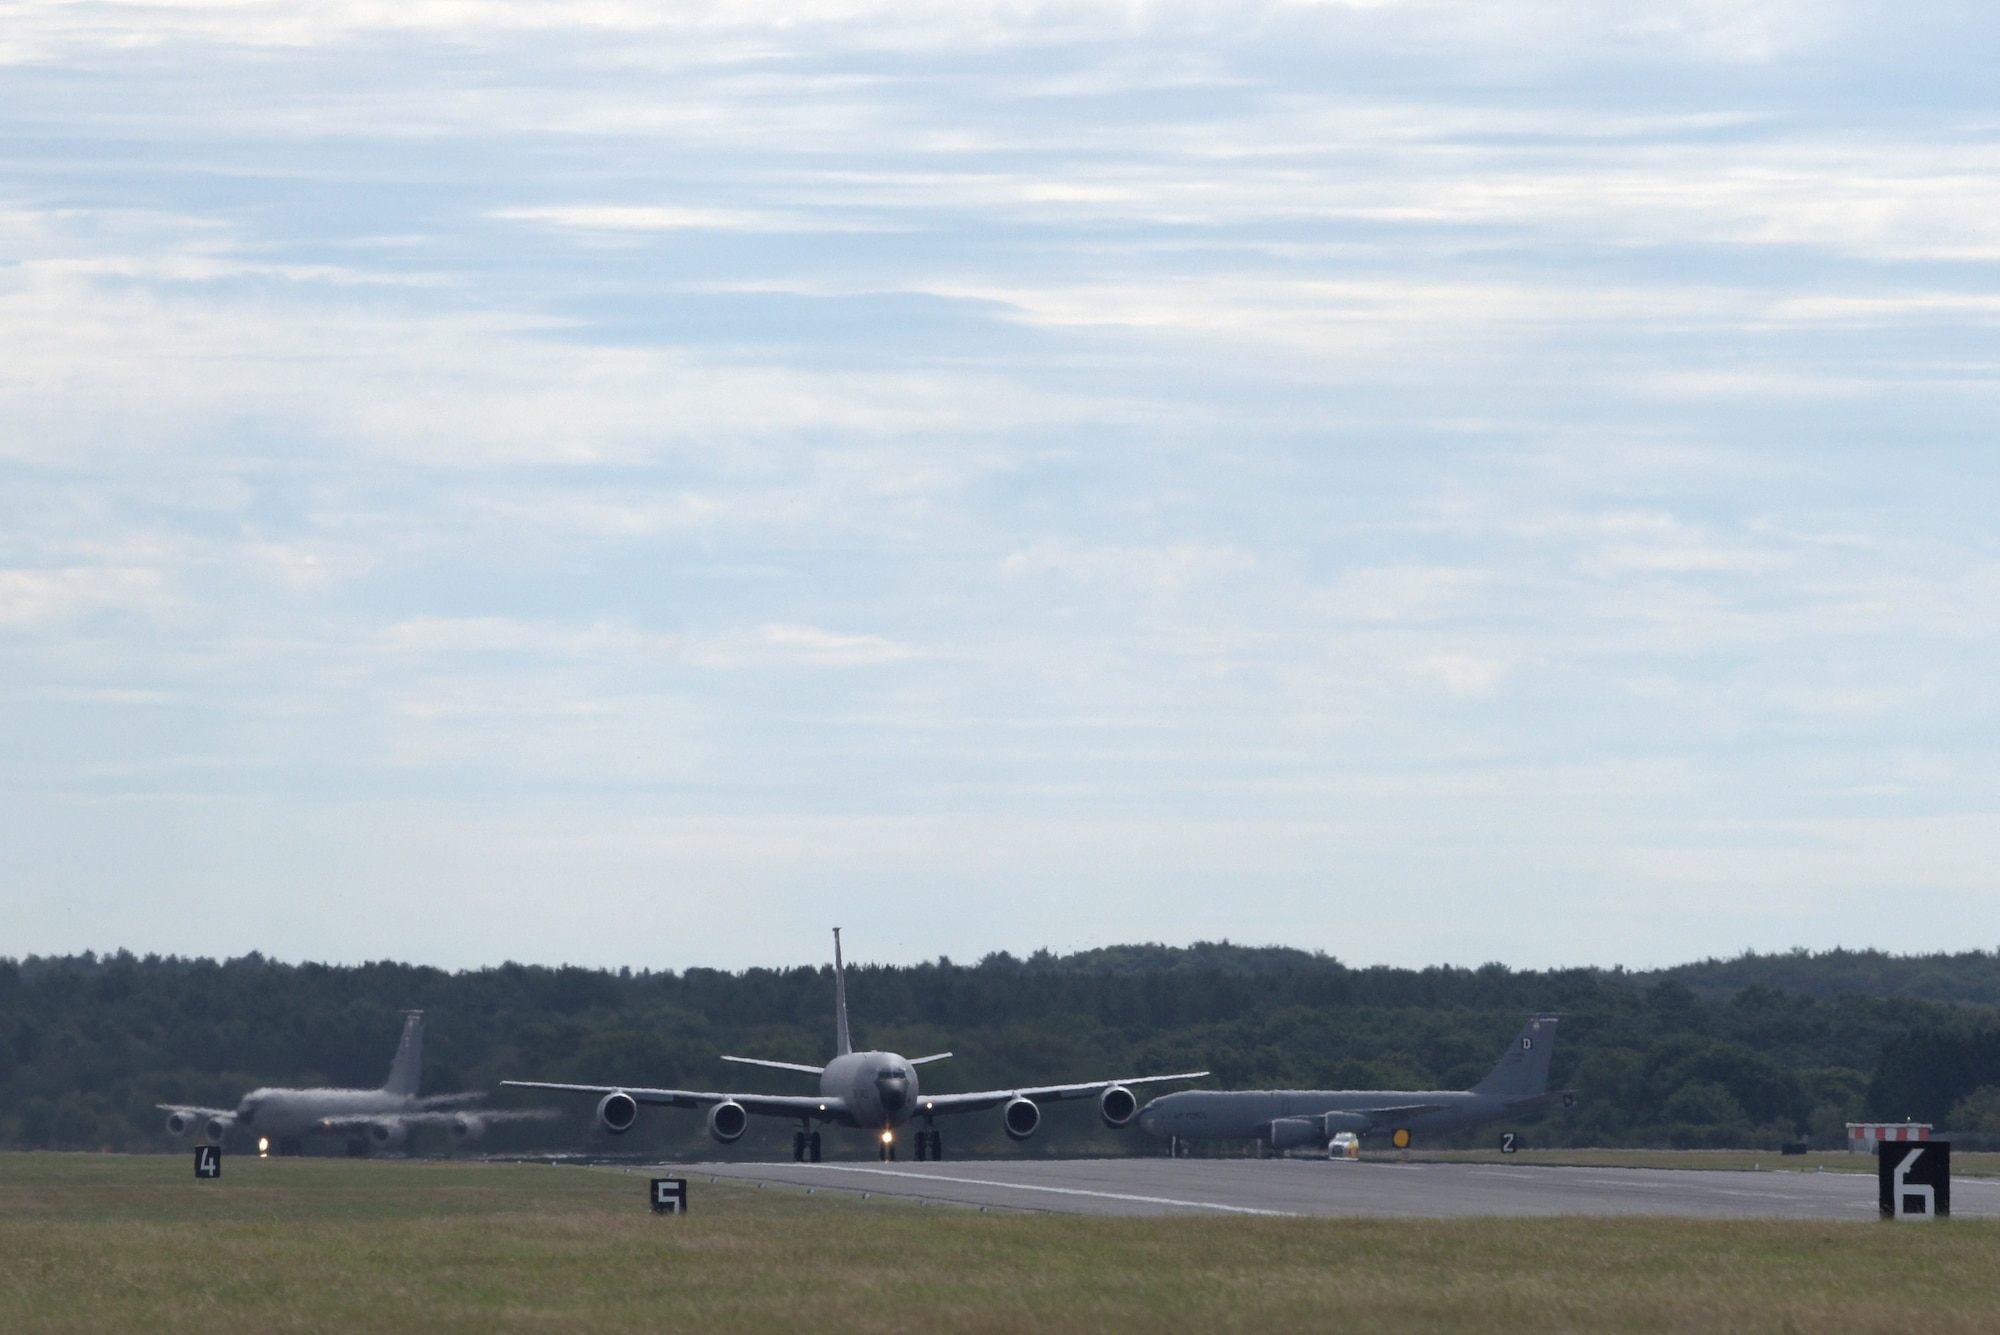 Three U.S. Air Force KC-135 Stratotankers, assigned to the 100th Air Refueling Wing, line up for takeoff at RAF Mildenahall, July 23, 2020. The 100th ARW provides unrivaled air refueling support throughout the European and African areas of responsibility. (U.S. Air Force photo by Senior Airman Benjamin Cooper)